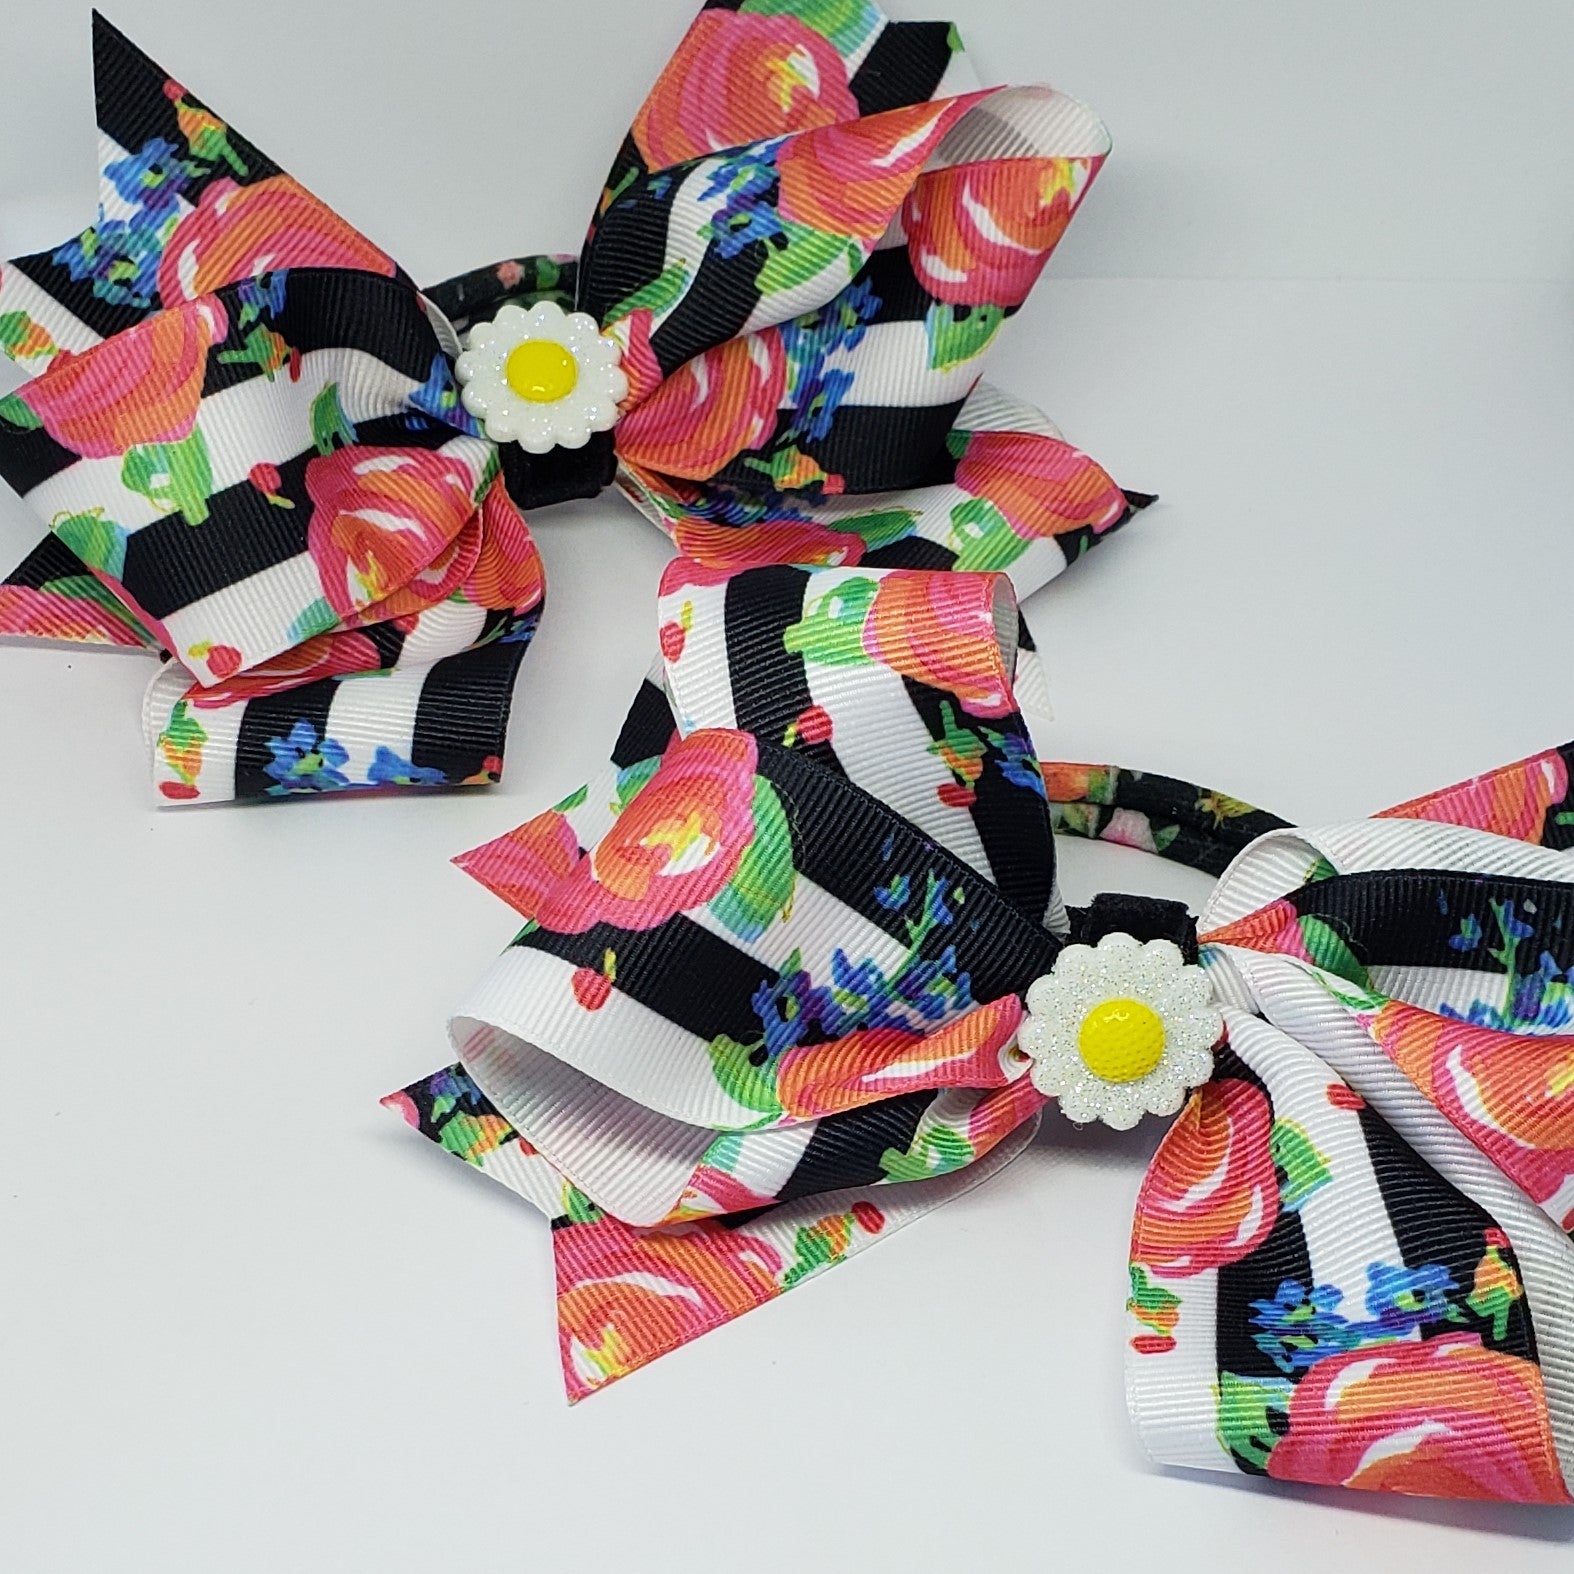 MiAmor Sunflower Party Black & White Floral Multi Hair Bow - Houzz of DVA Boutique